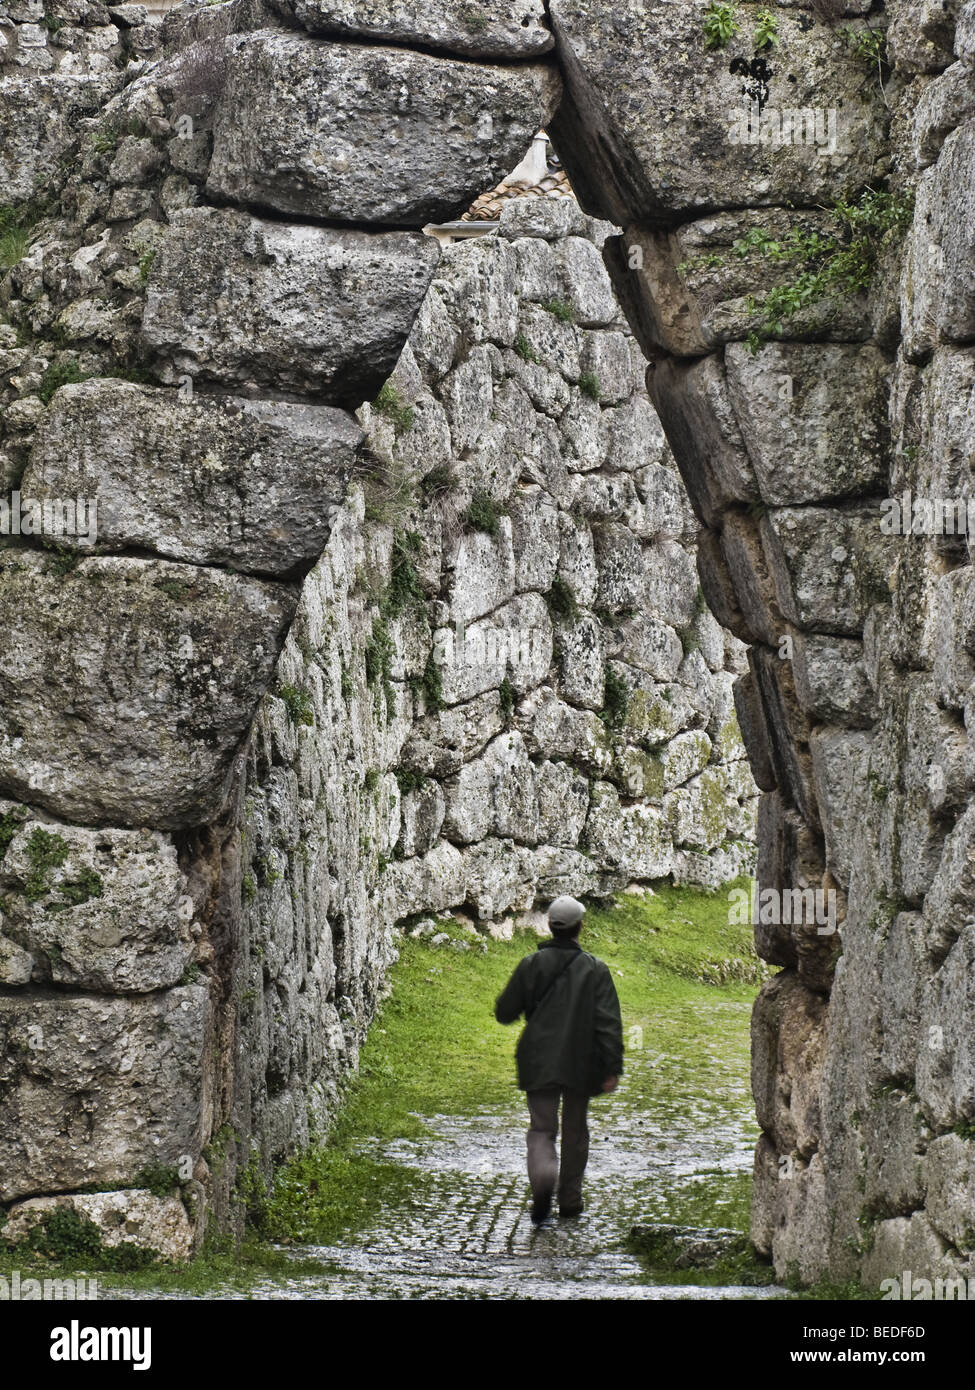 The ancient megalithic walls of Civitavecchia d'Arpino, Italy. Stock Photo